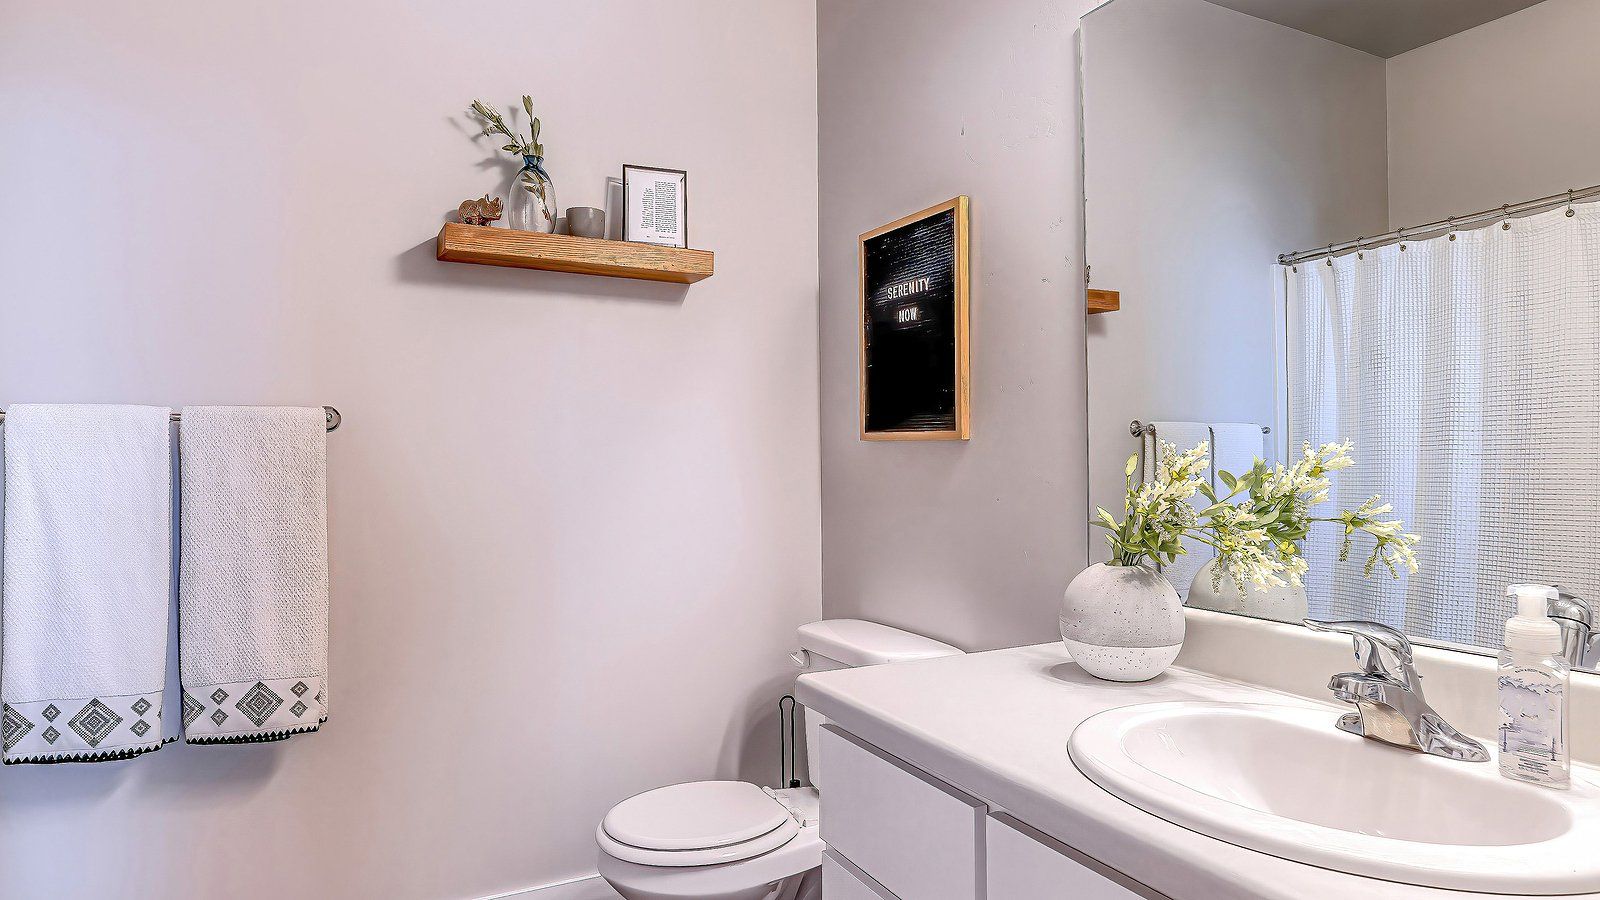 Bathroom Remodeling in Buffalo, NY and Surrounding Areas